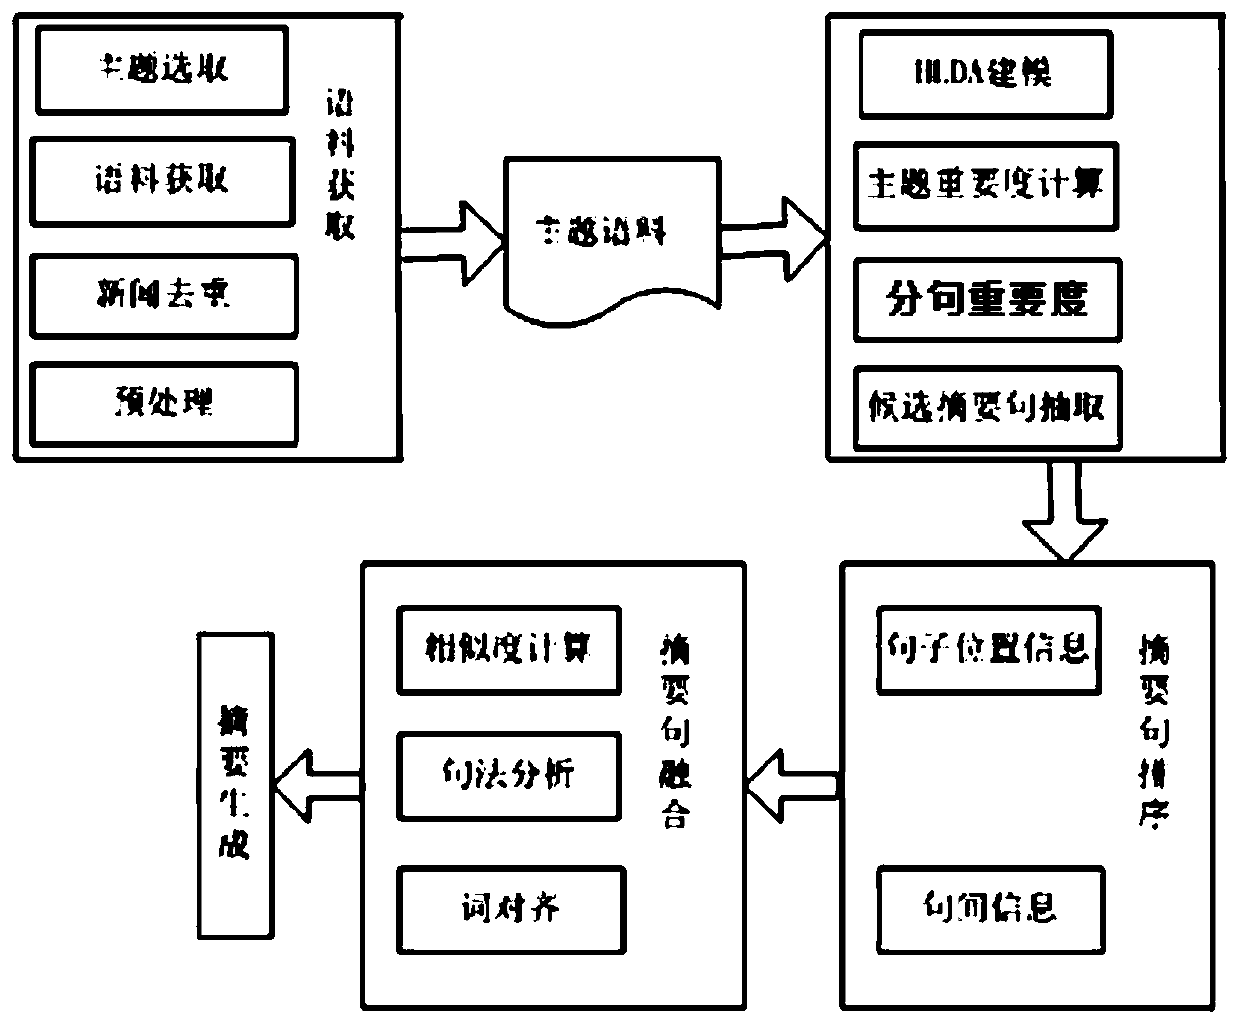 Multi-document abstract generation method and system